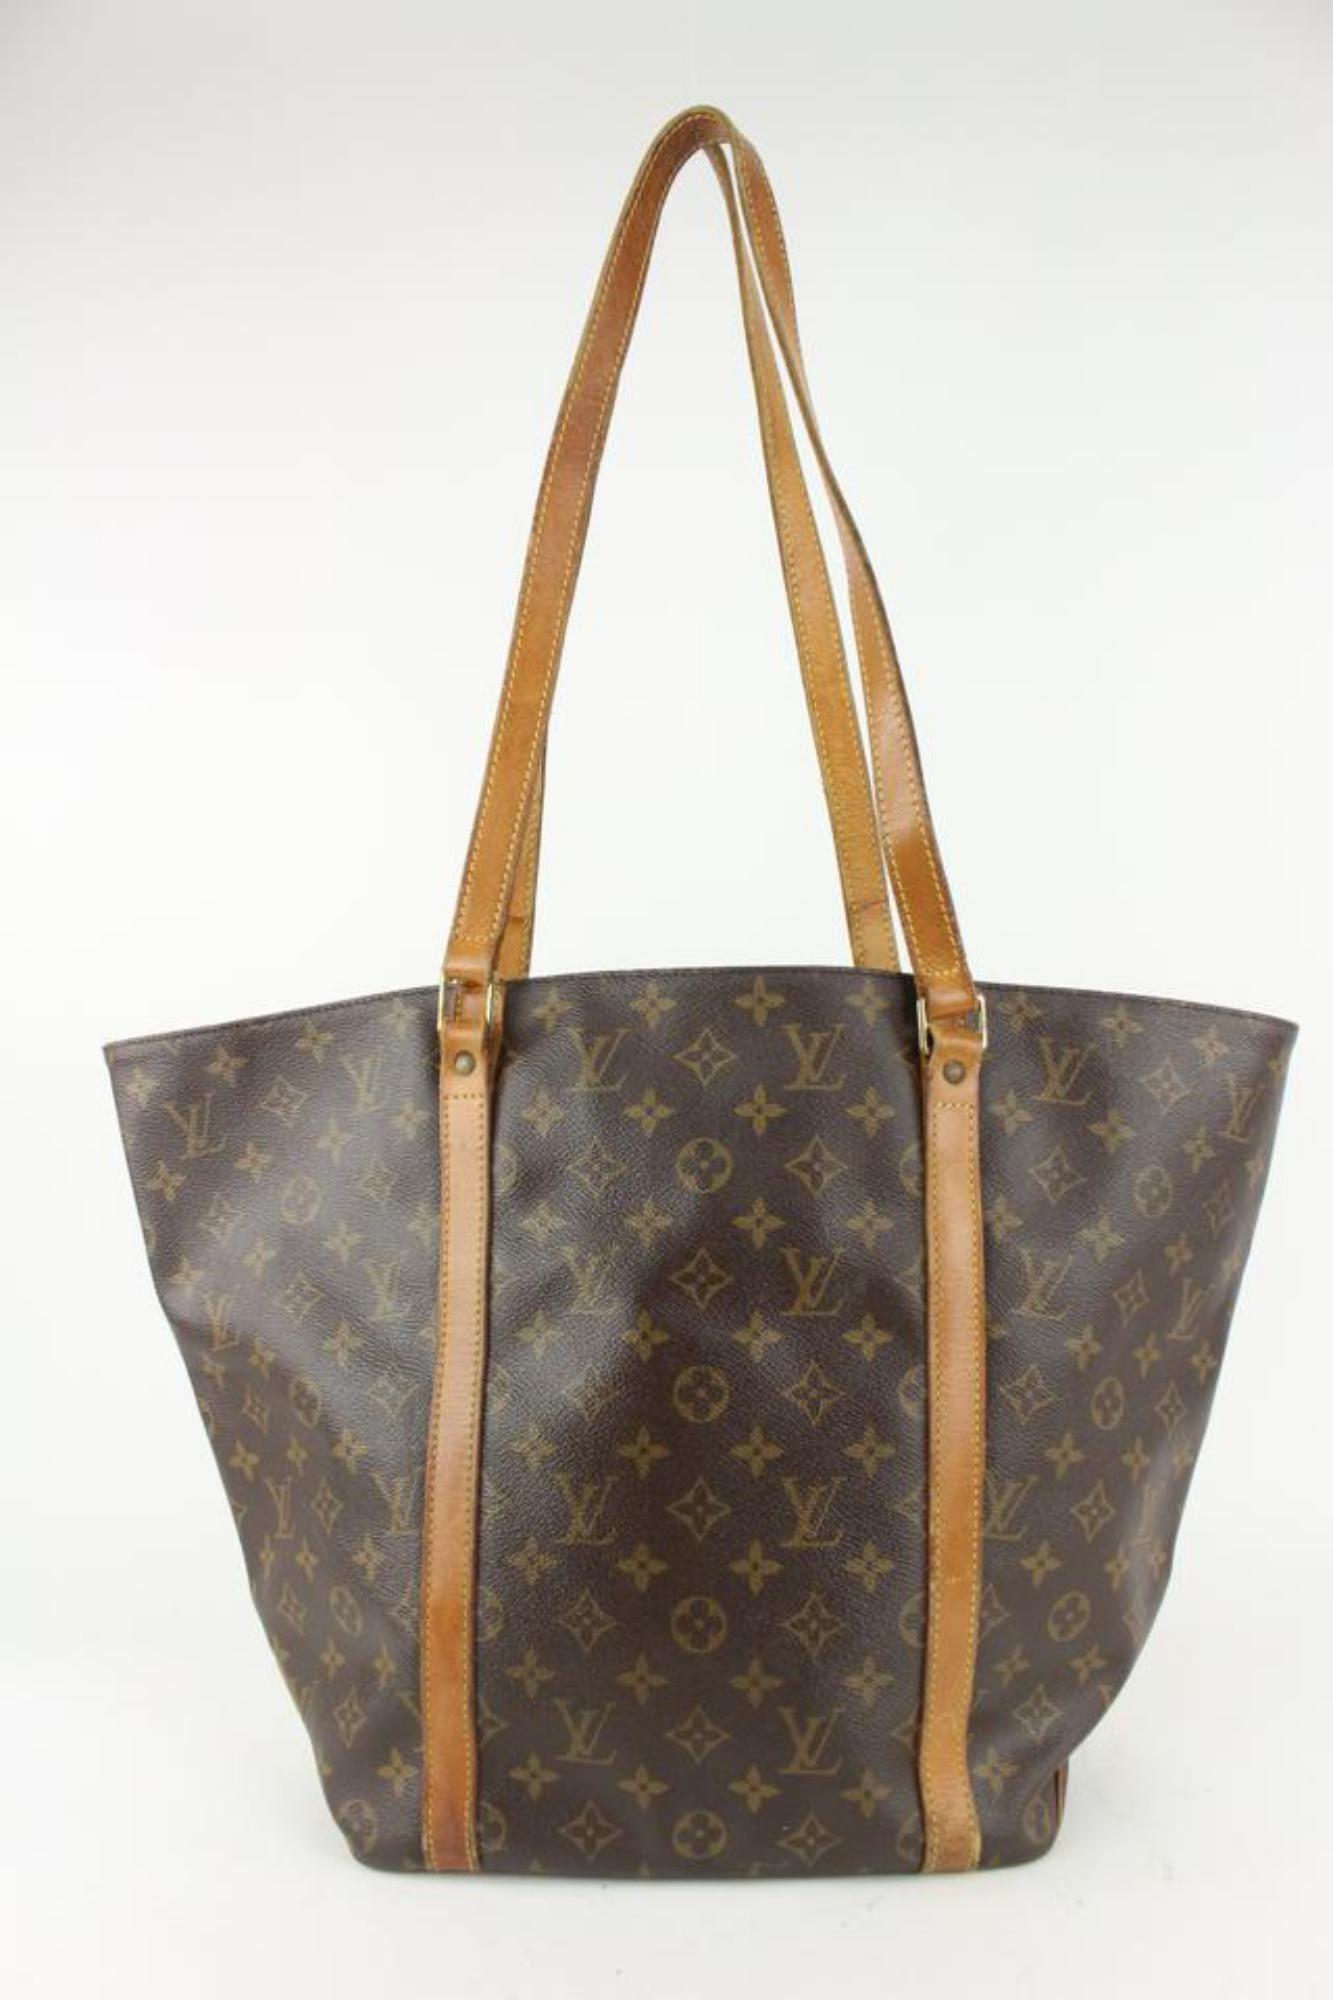 Louis Vuitton Monogram Sac Shopping Tote Bag 927lv52 In Fair Condition For Sale In Dix hills, NY